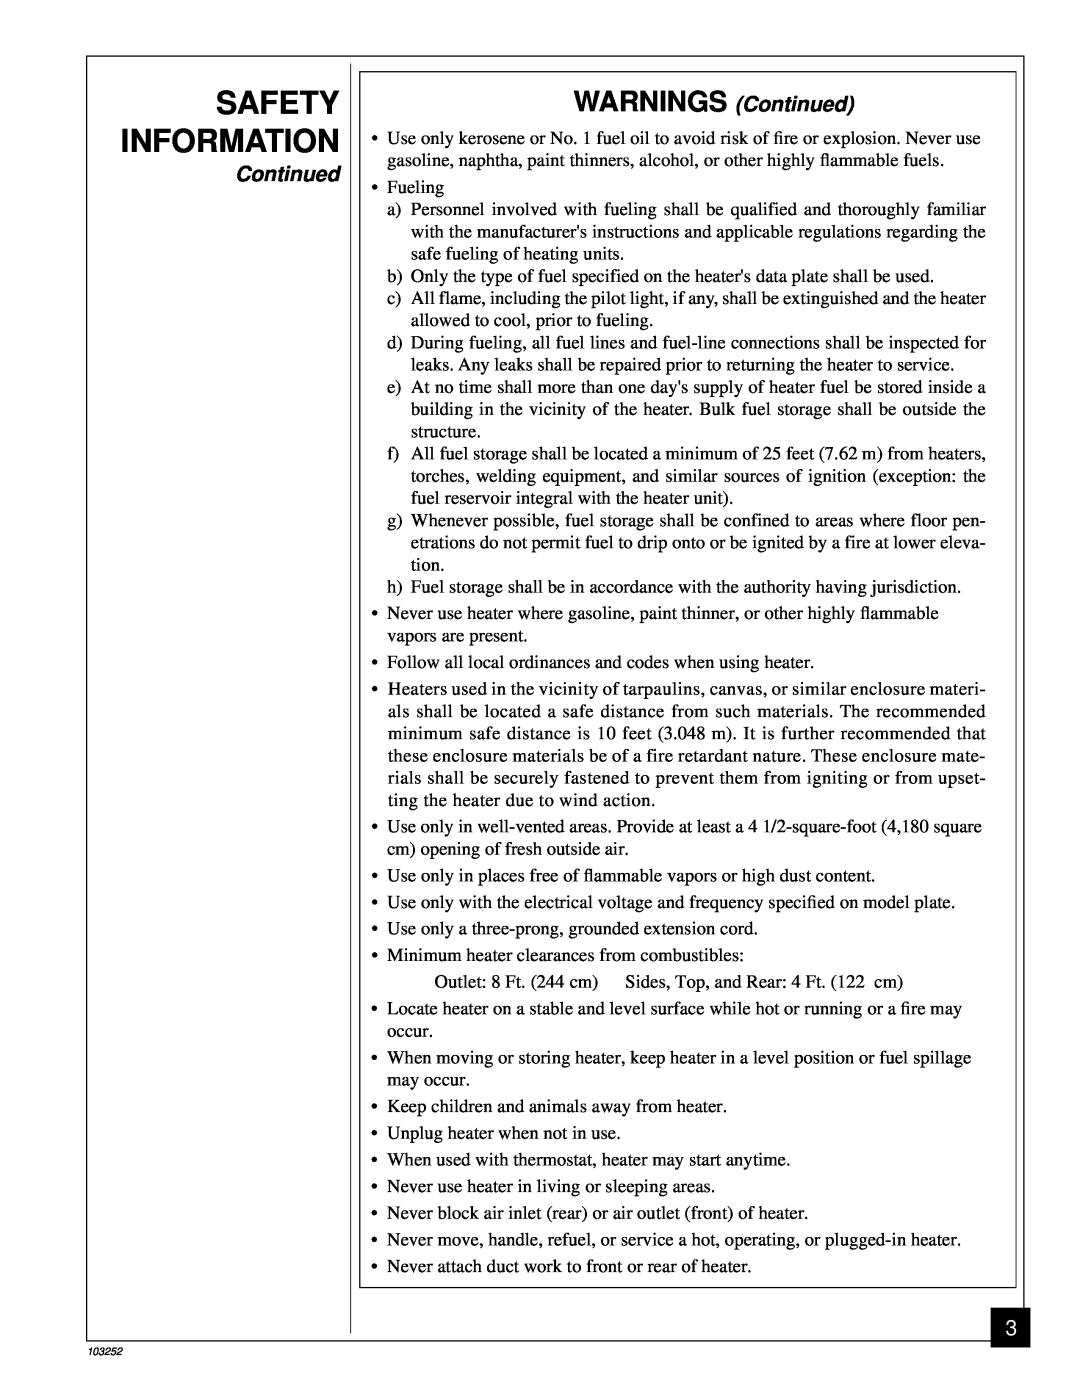 Desa RK150 owner manual Safety Information, WARNINGS Continued 